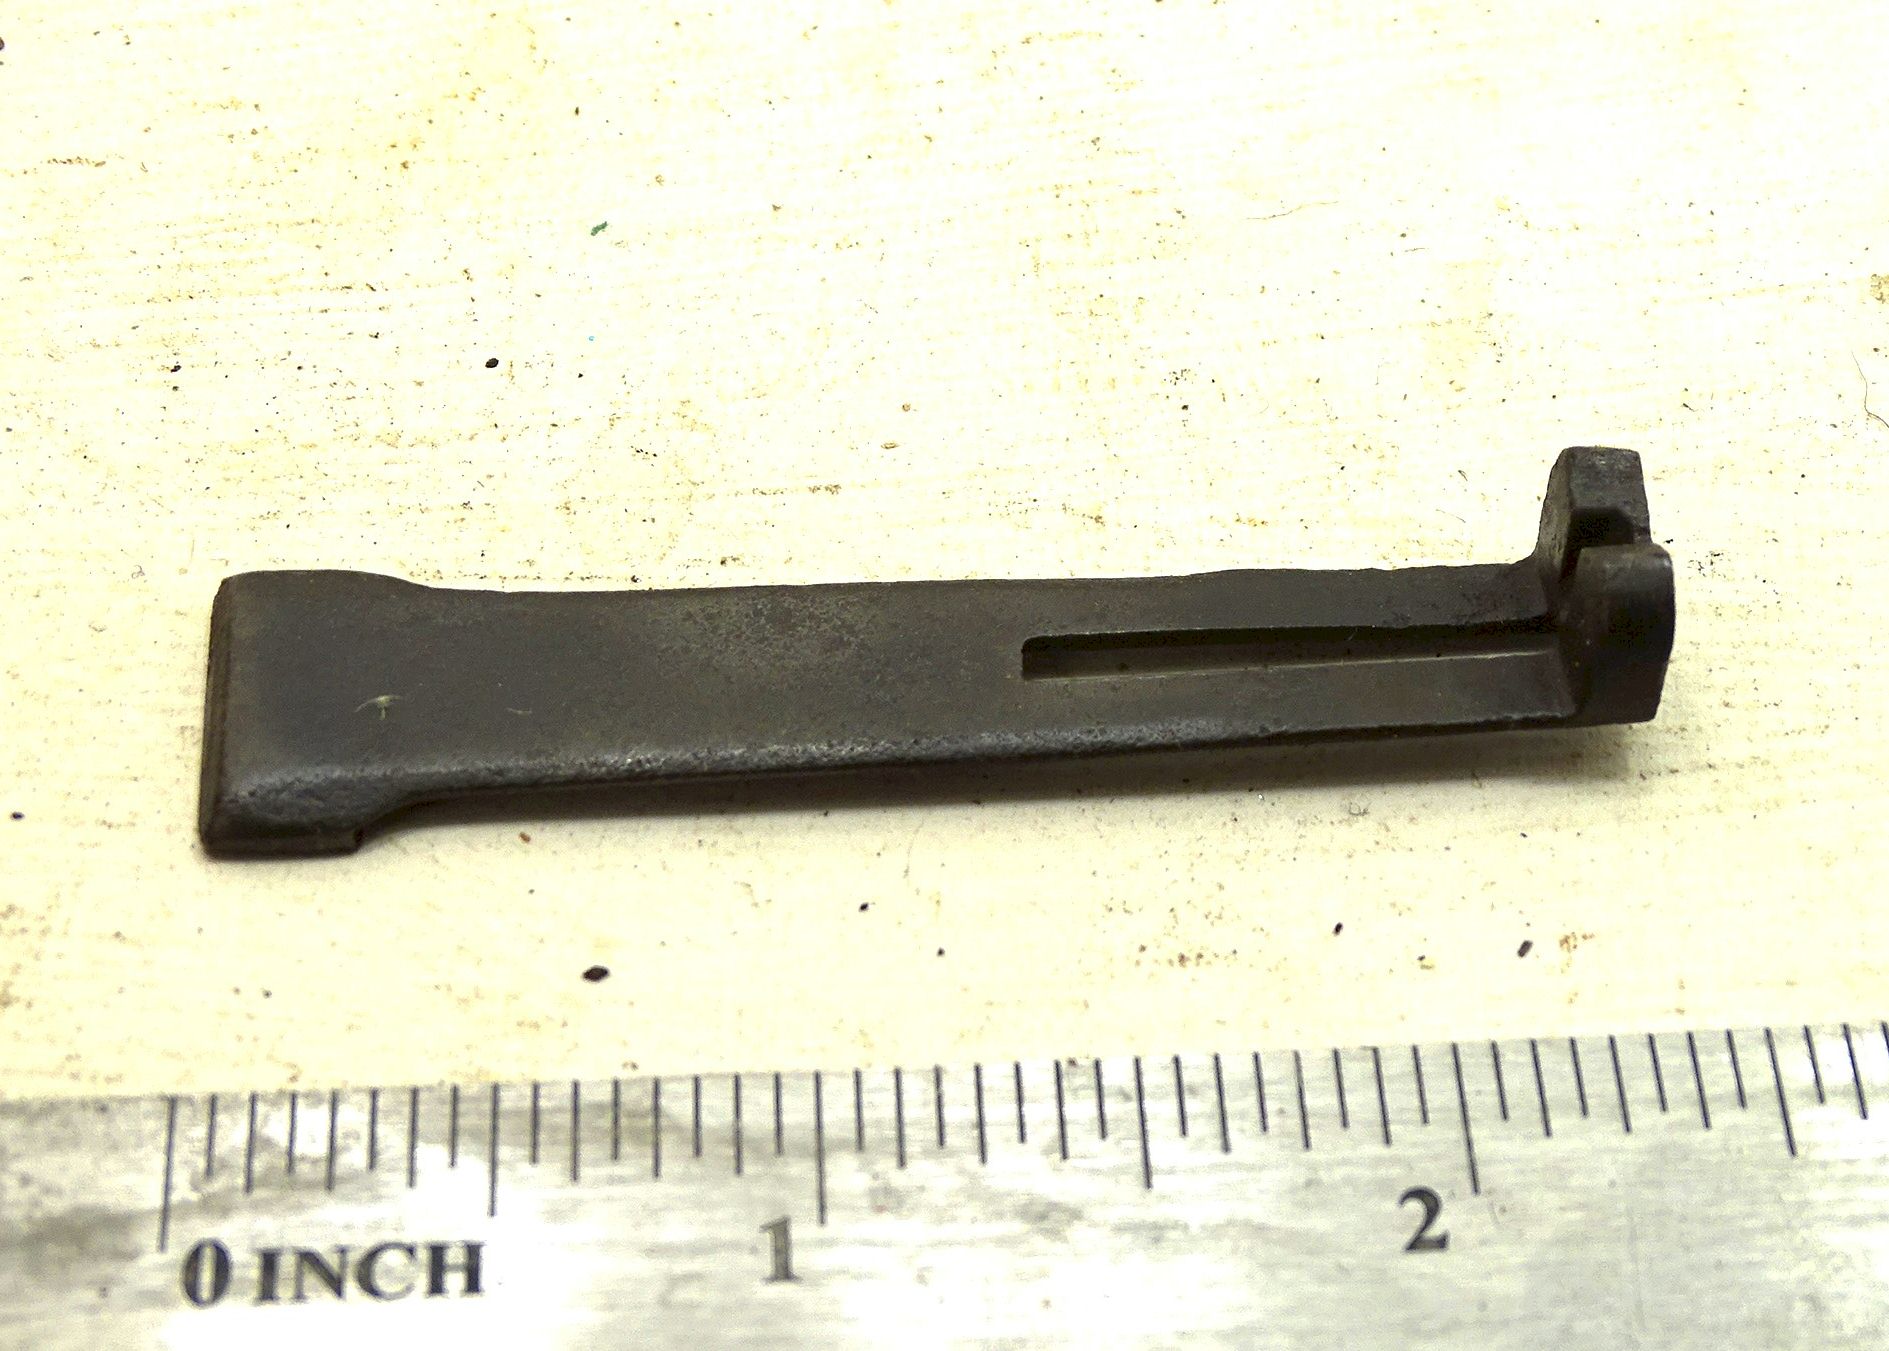 Sight - Rear for a Remington No. 2 Rolling block rifle - Click Image to Close